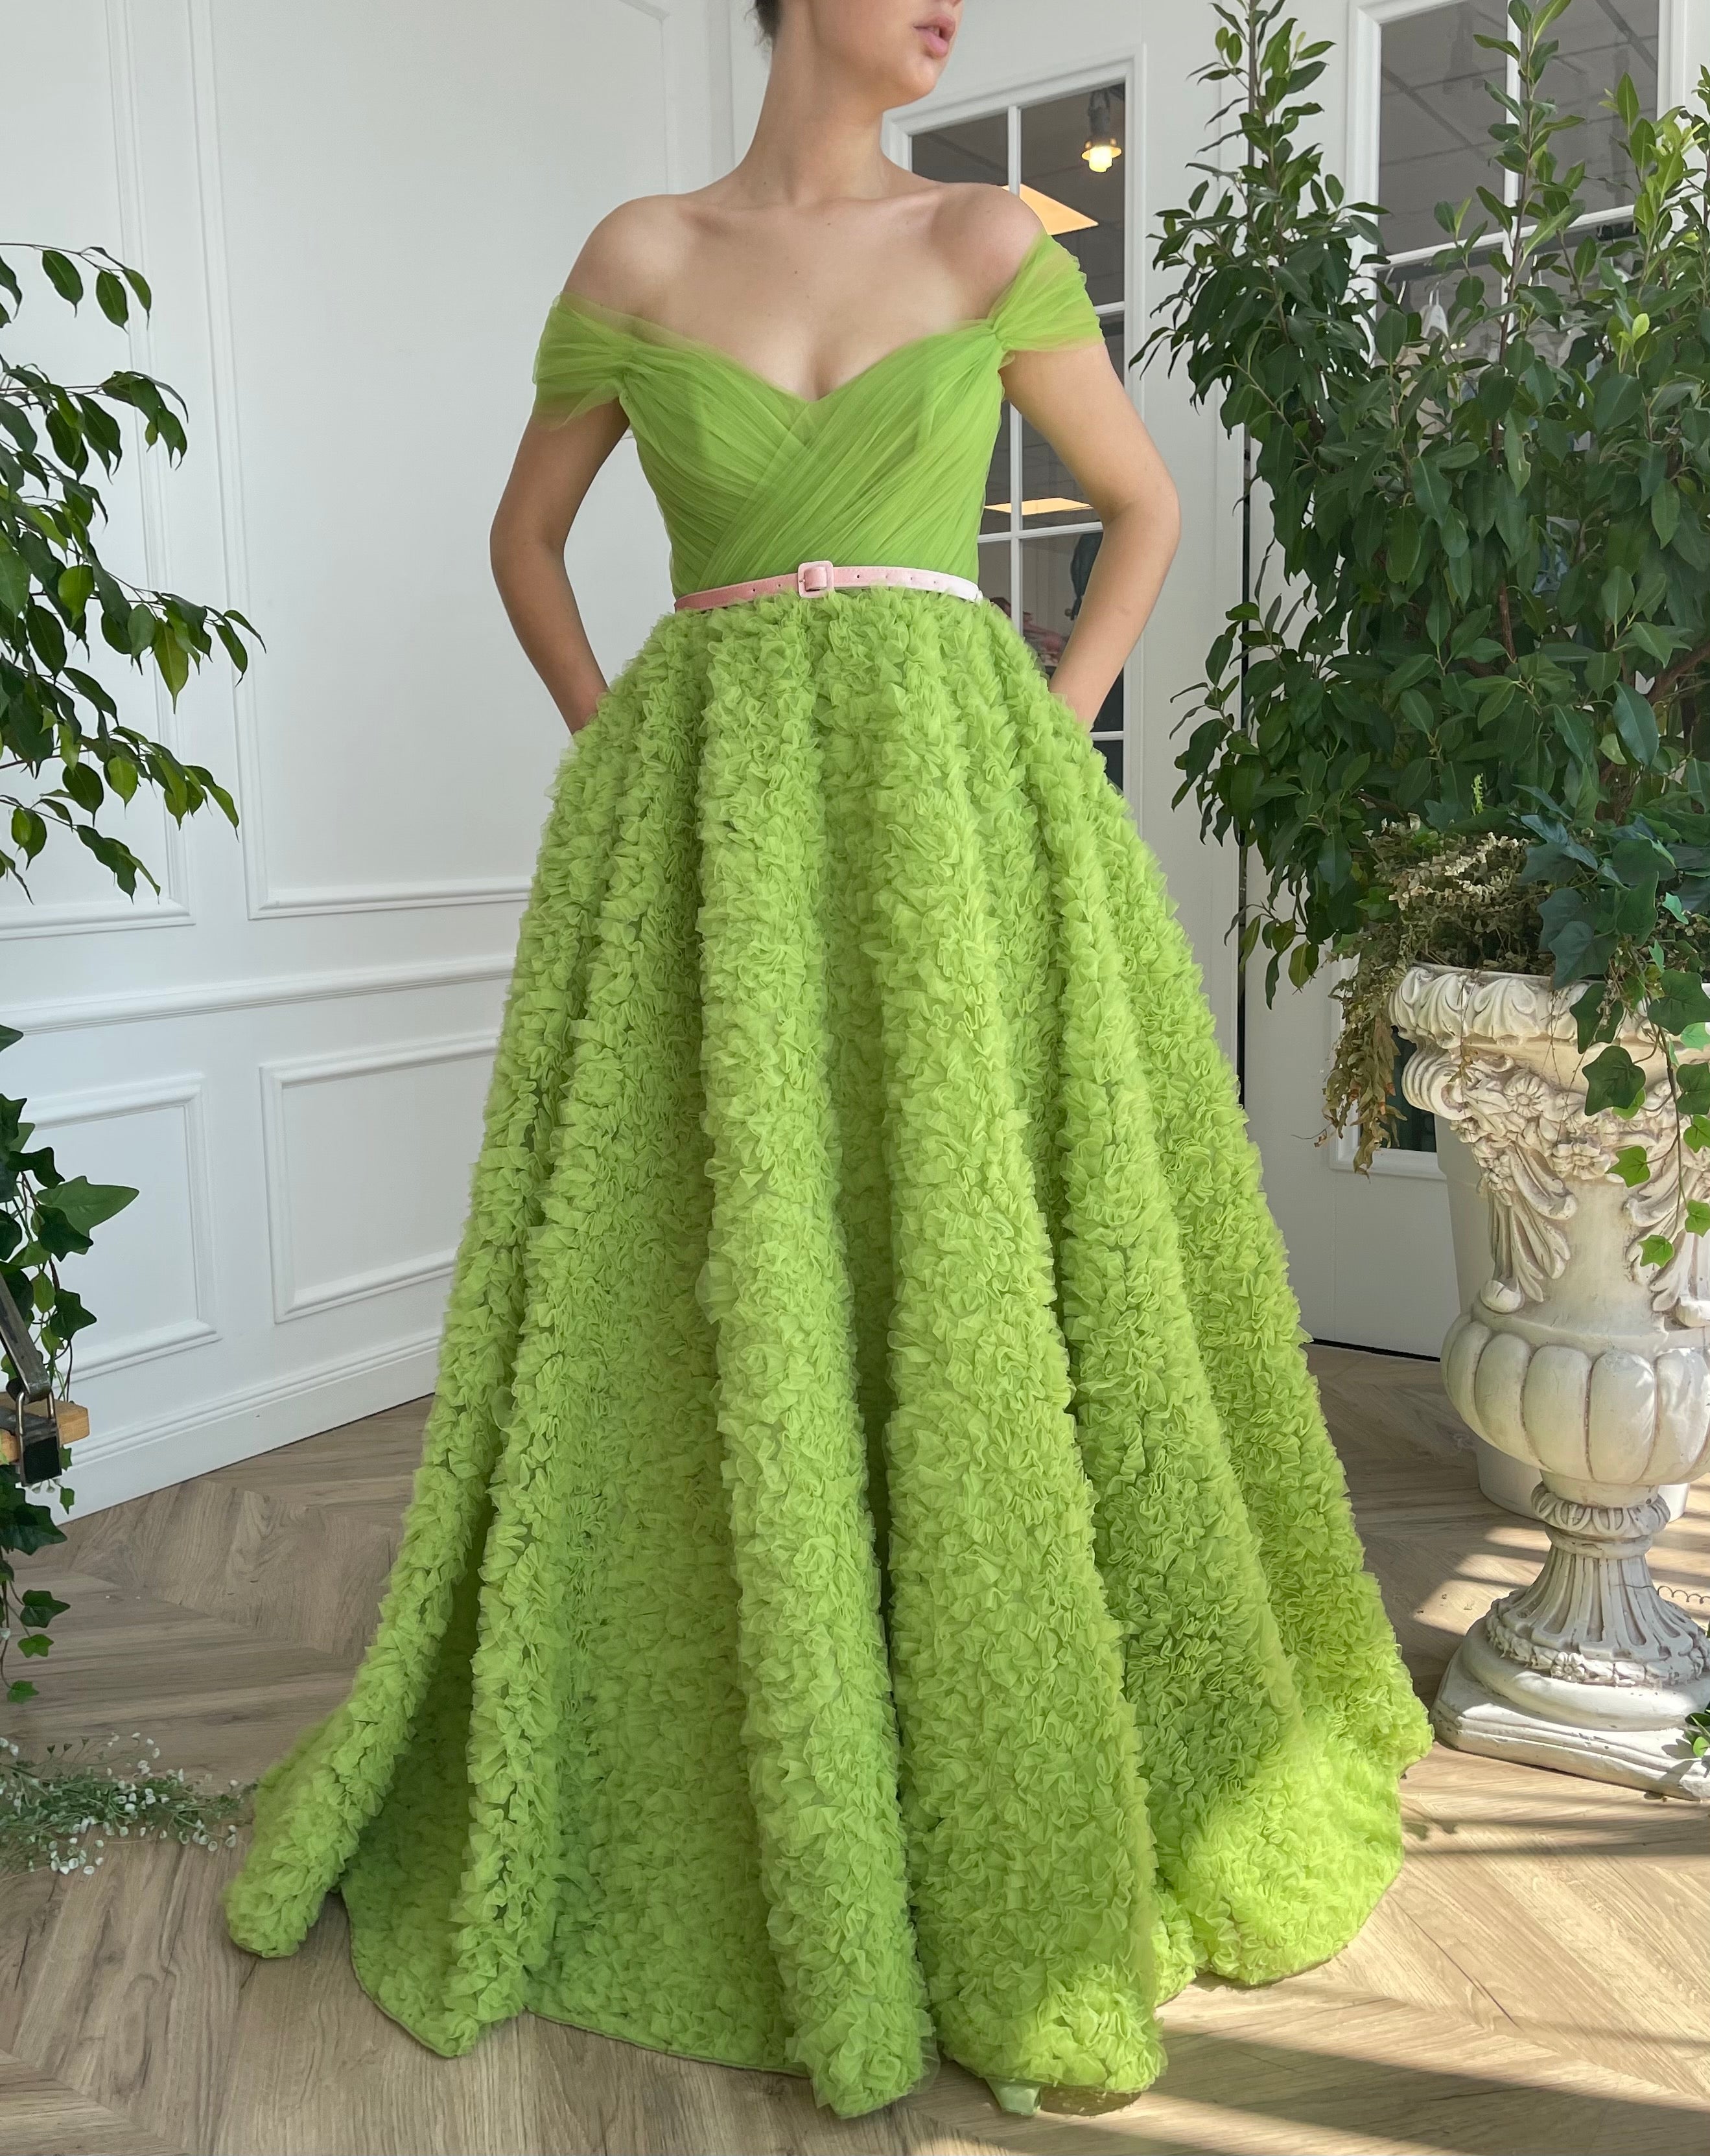 Green A-Line dress with off the shoulder sleeves and belt